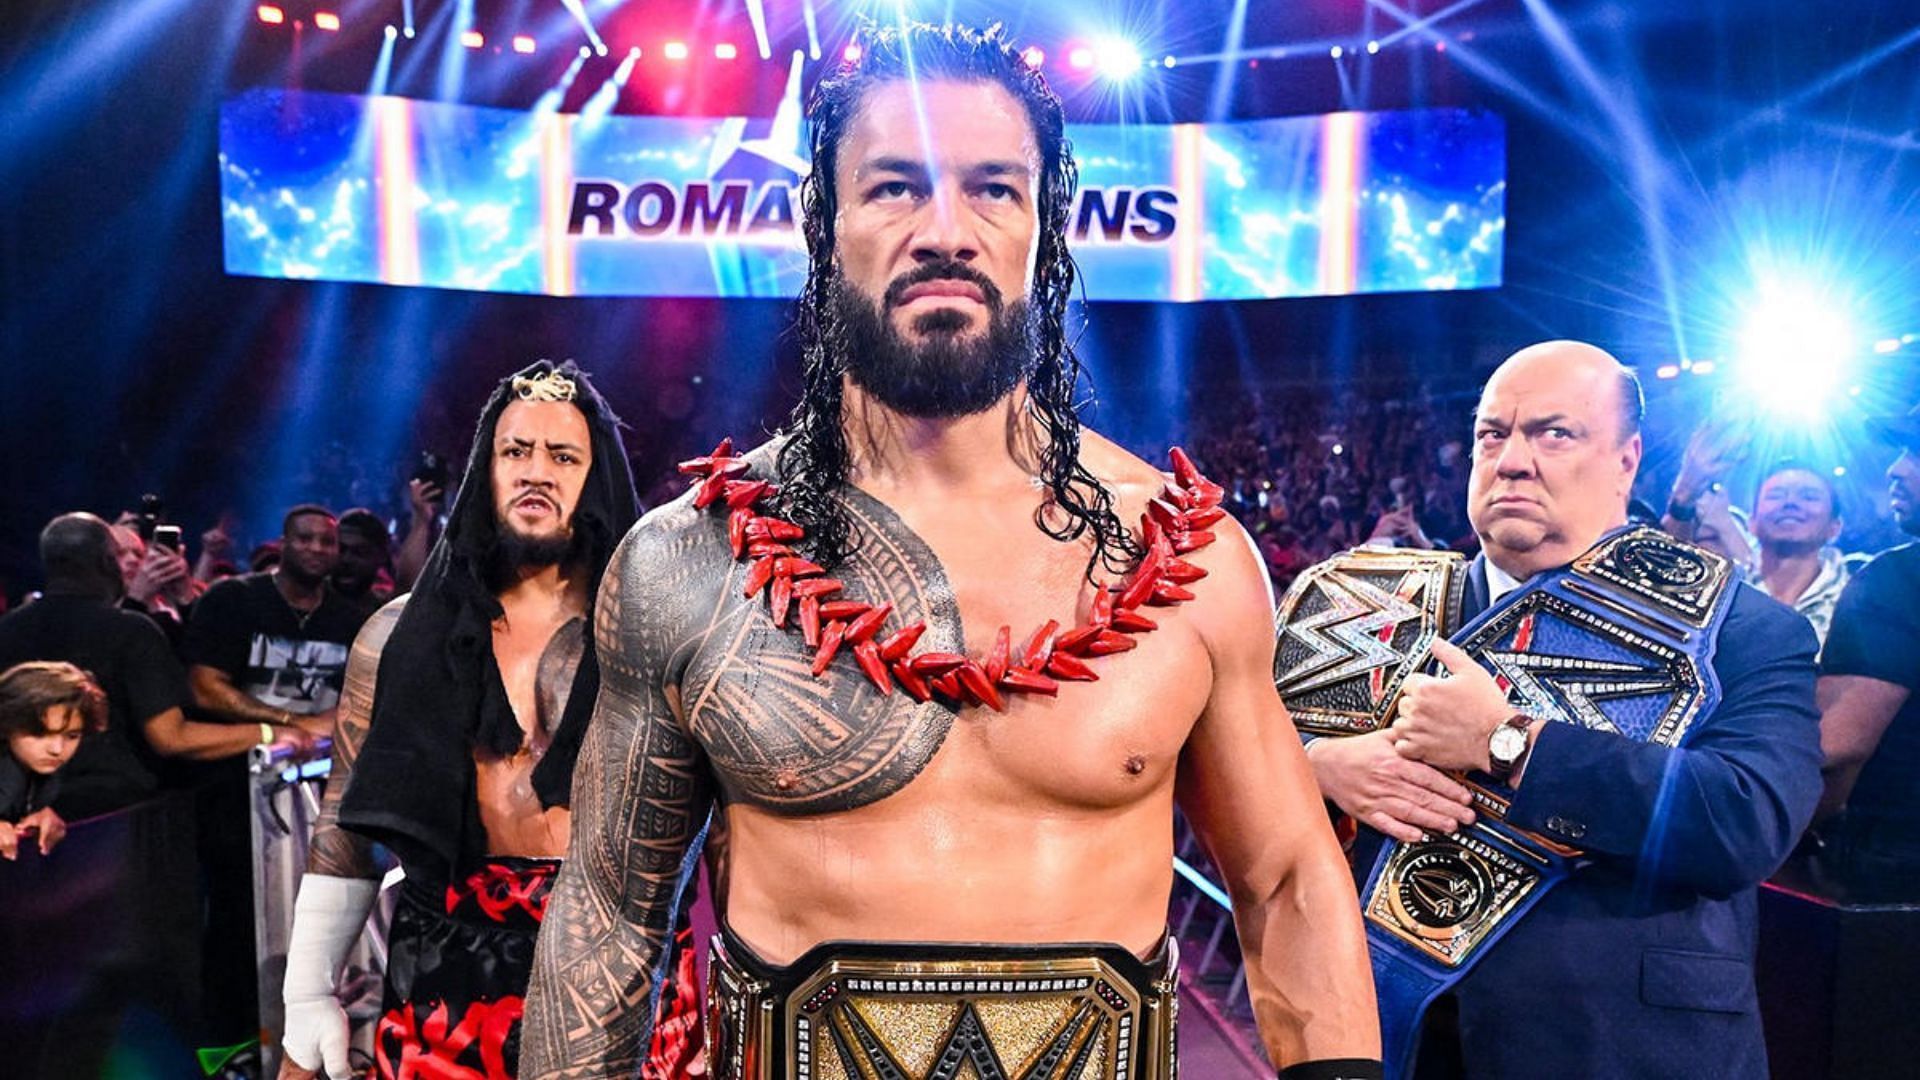 Roman Reigns has dominated as the face of WWE